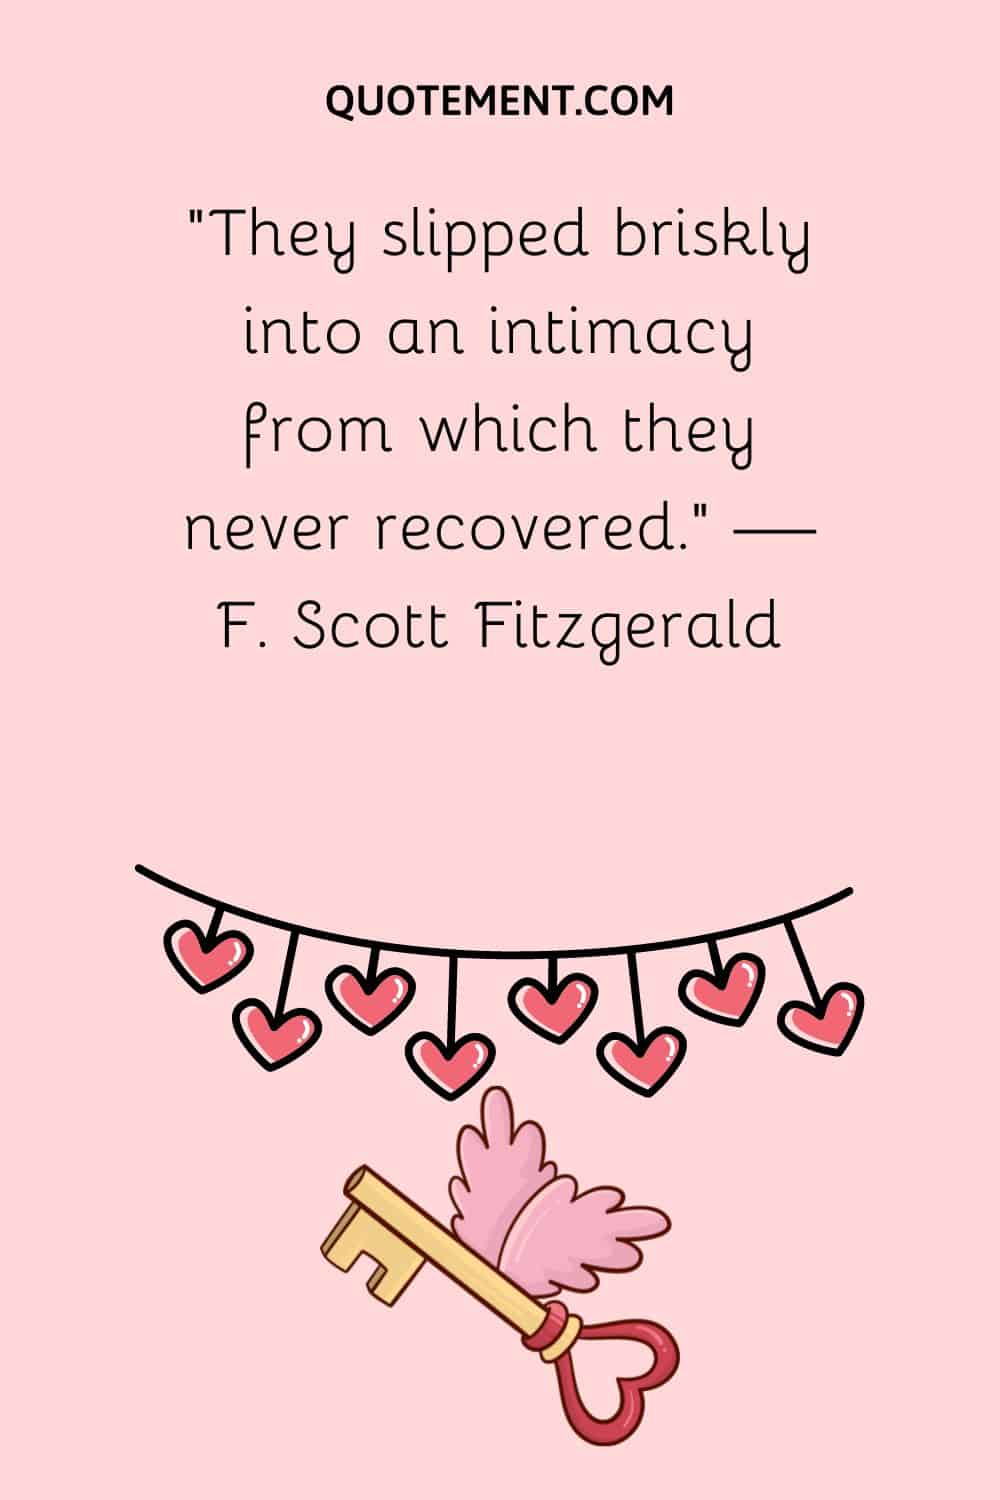 “They slipped briskly into an intimacy from which they never recovered.” — F. Scott Fitzgerald